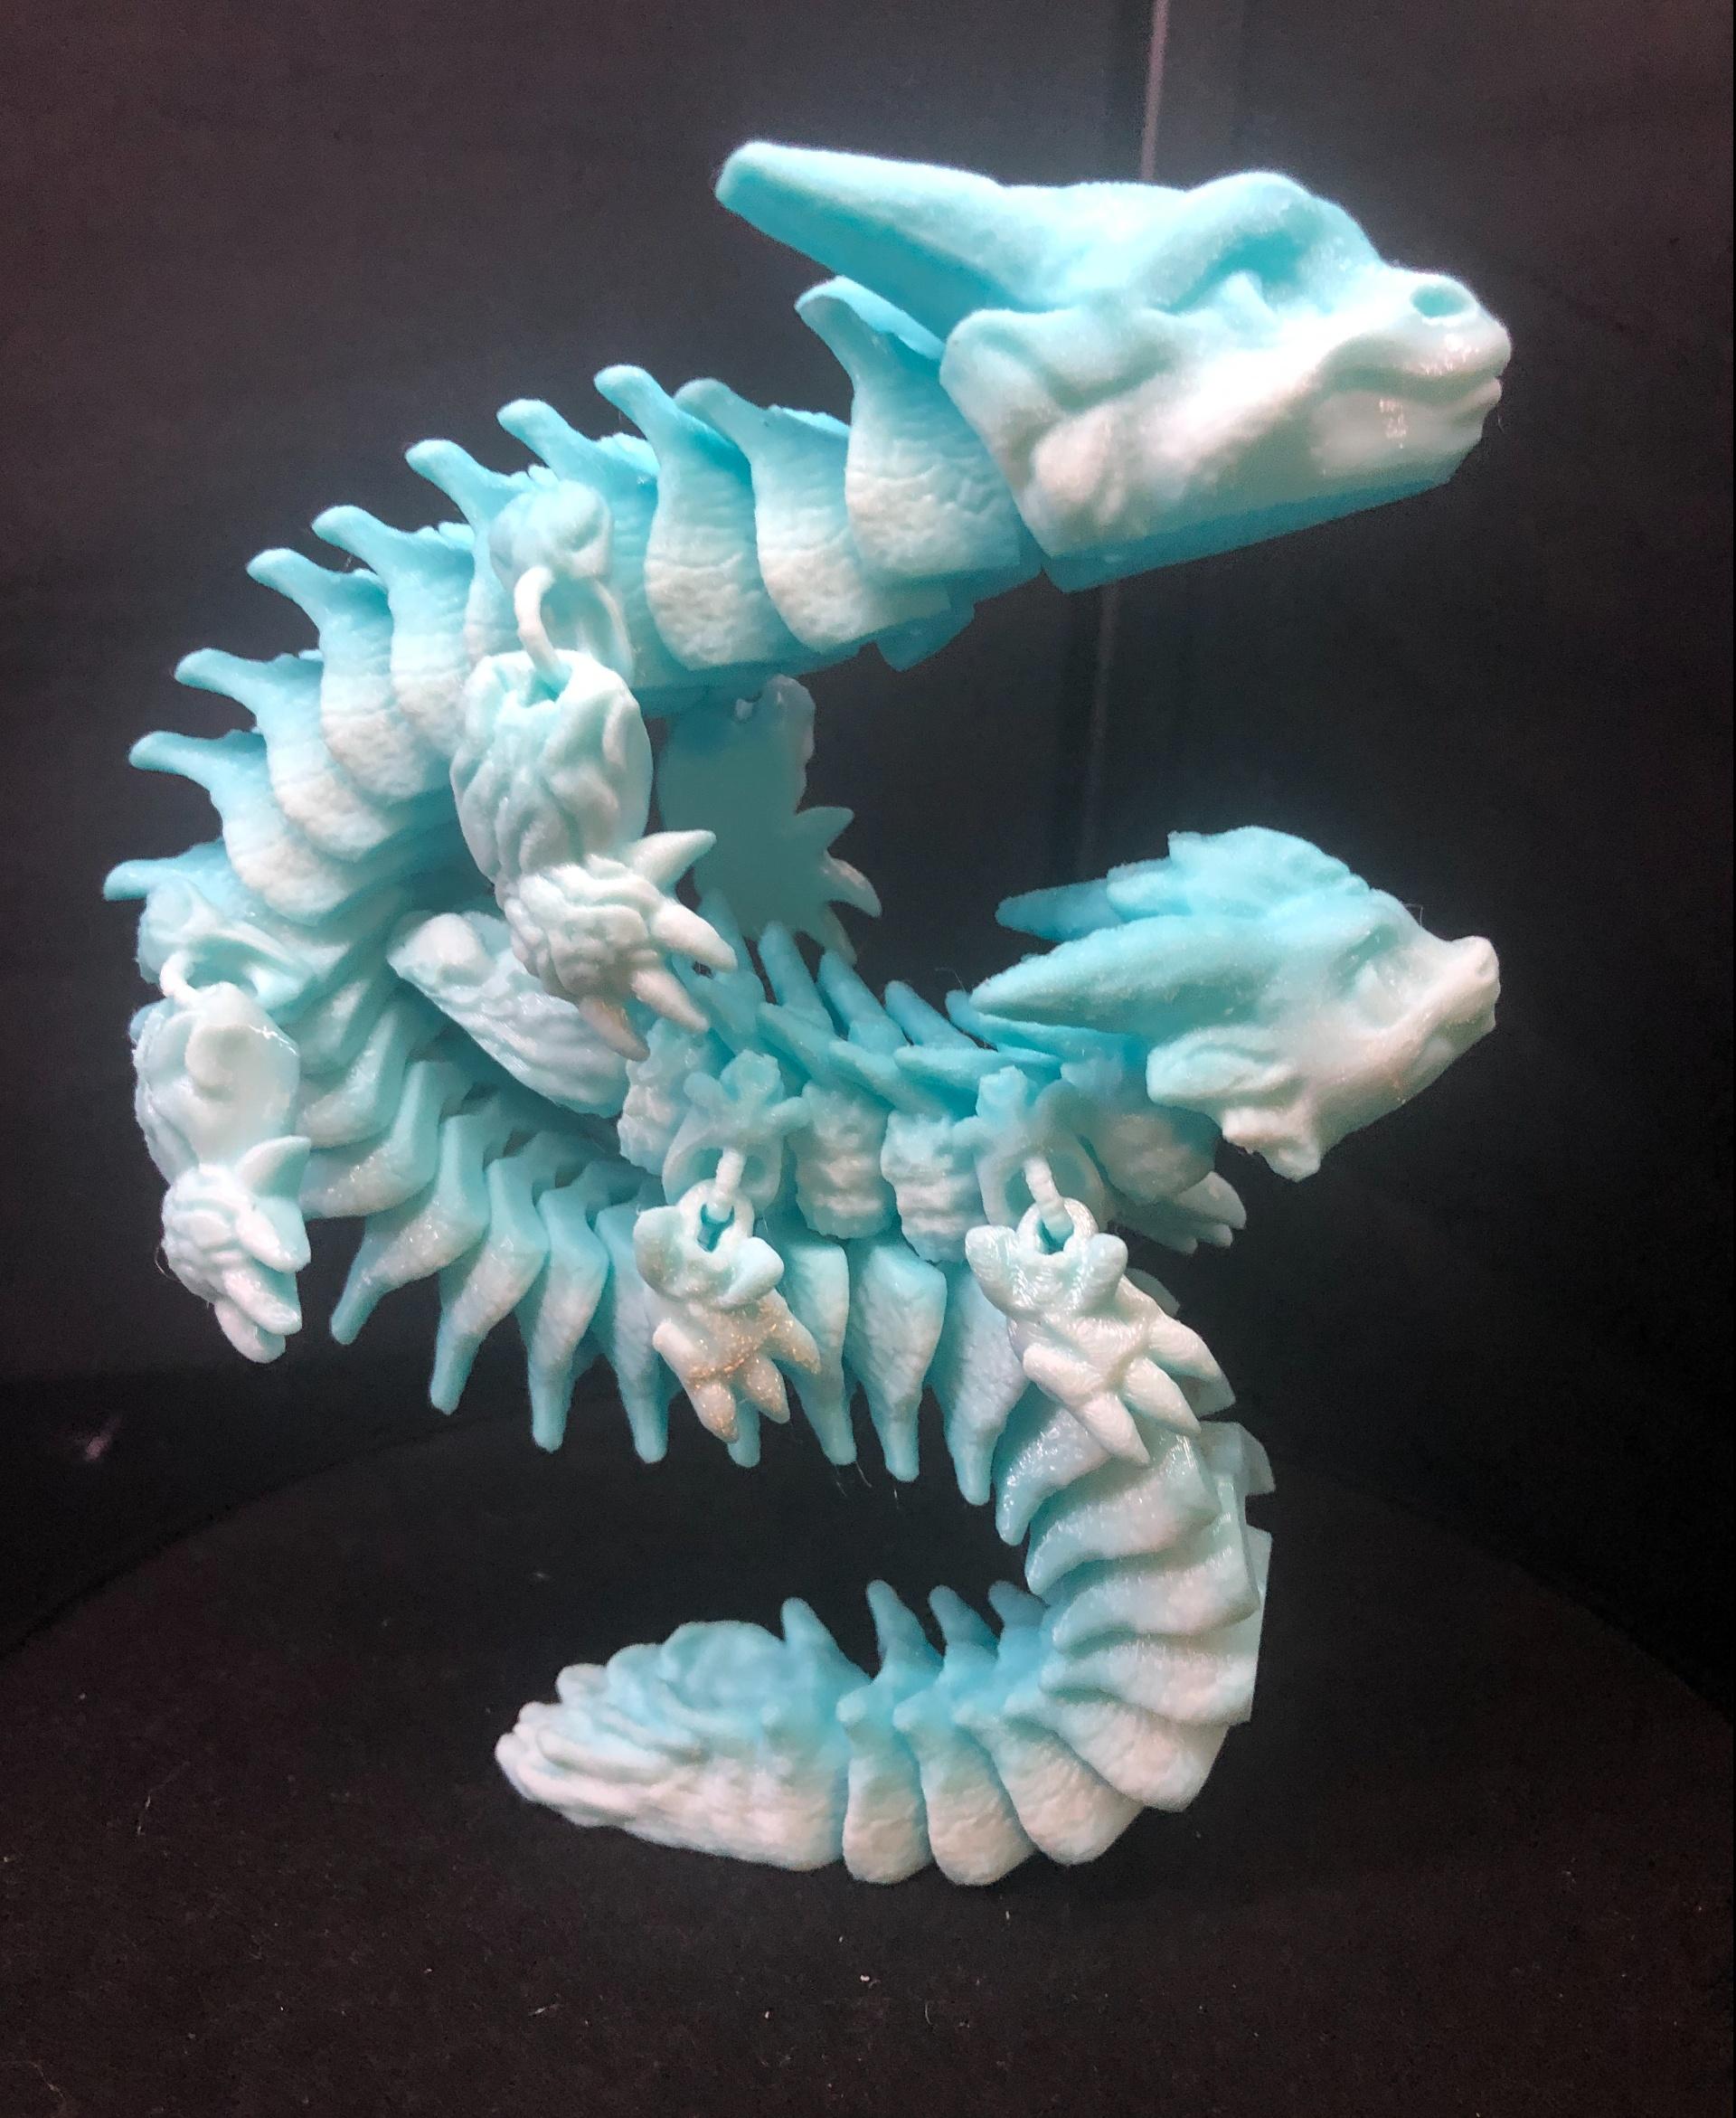 Cold Spell, Winter Dragon - Articulated Dragon Snap-Flex Fidget (Medium Tightness Joints) - @Mimetics3d's #Coldsnap and #Coldspell displaying their snappiest #Snapflex moves with a bit of #articulateddragon gymnastics. Printed on Bambulabs A1 using translucent gradient PETG. - 3d model